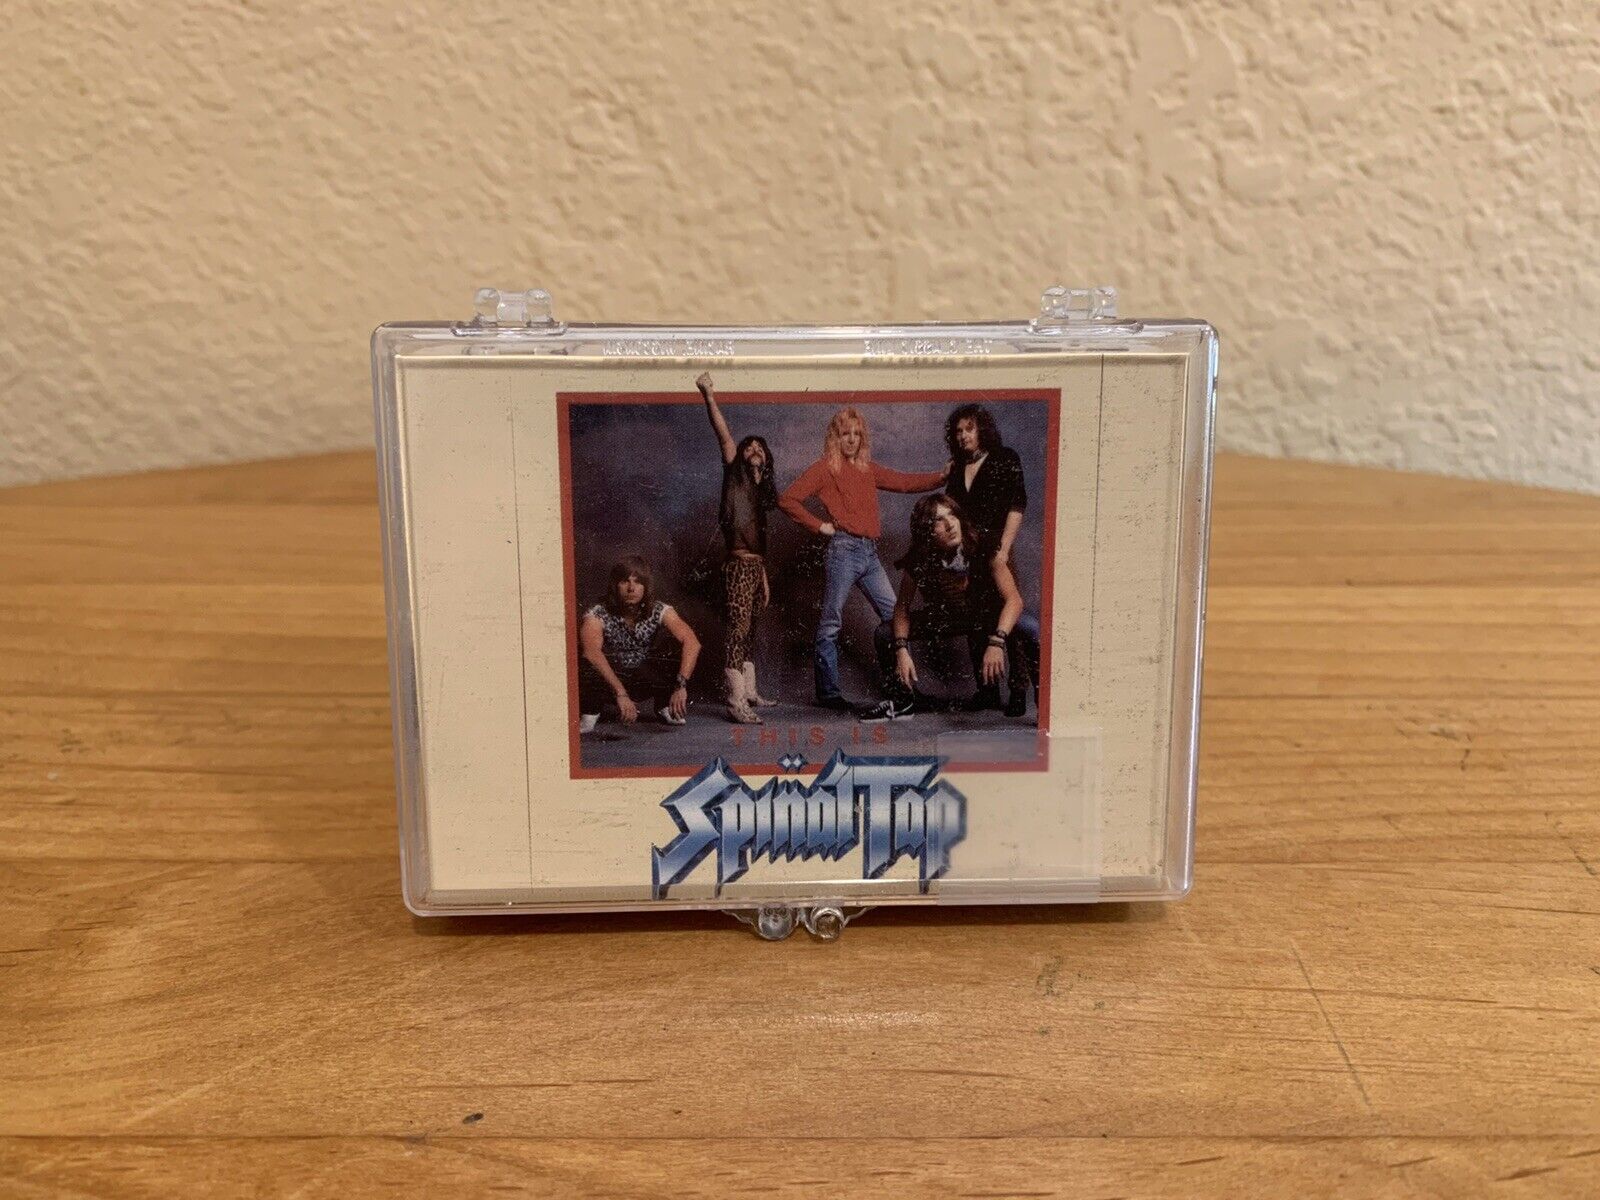 This Is Spinal Tap - Set of 36 Trading Cards - NECA 2000